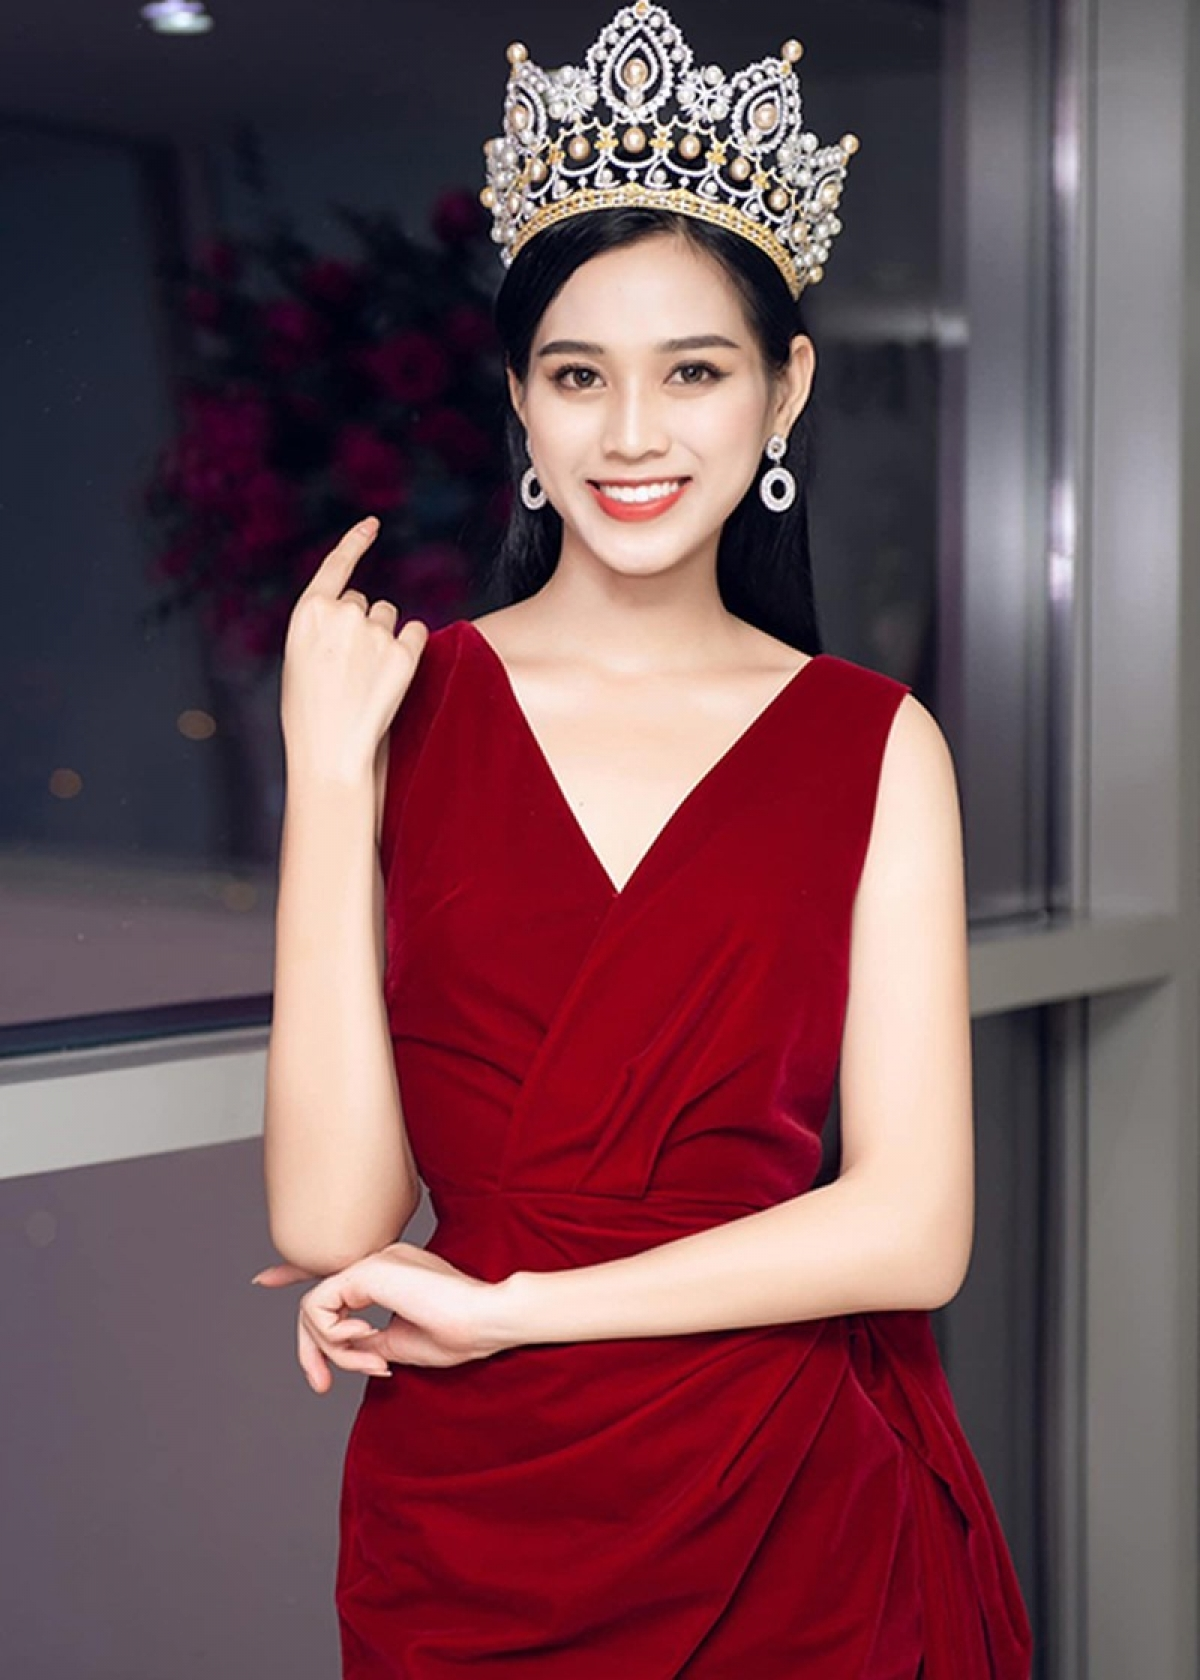 Vietnamese beauty queen to compete at Miss World 2021 this December